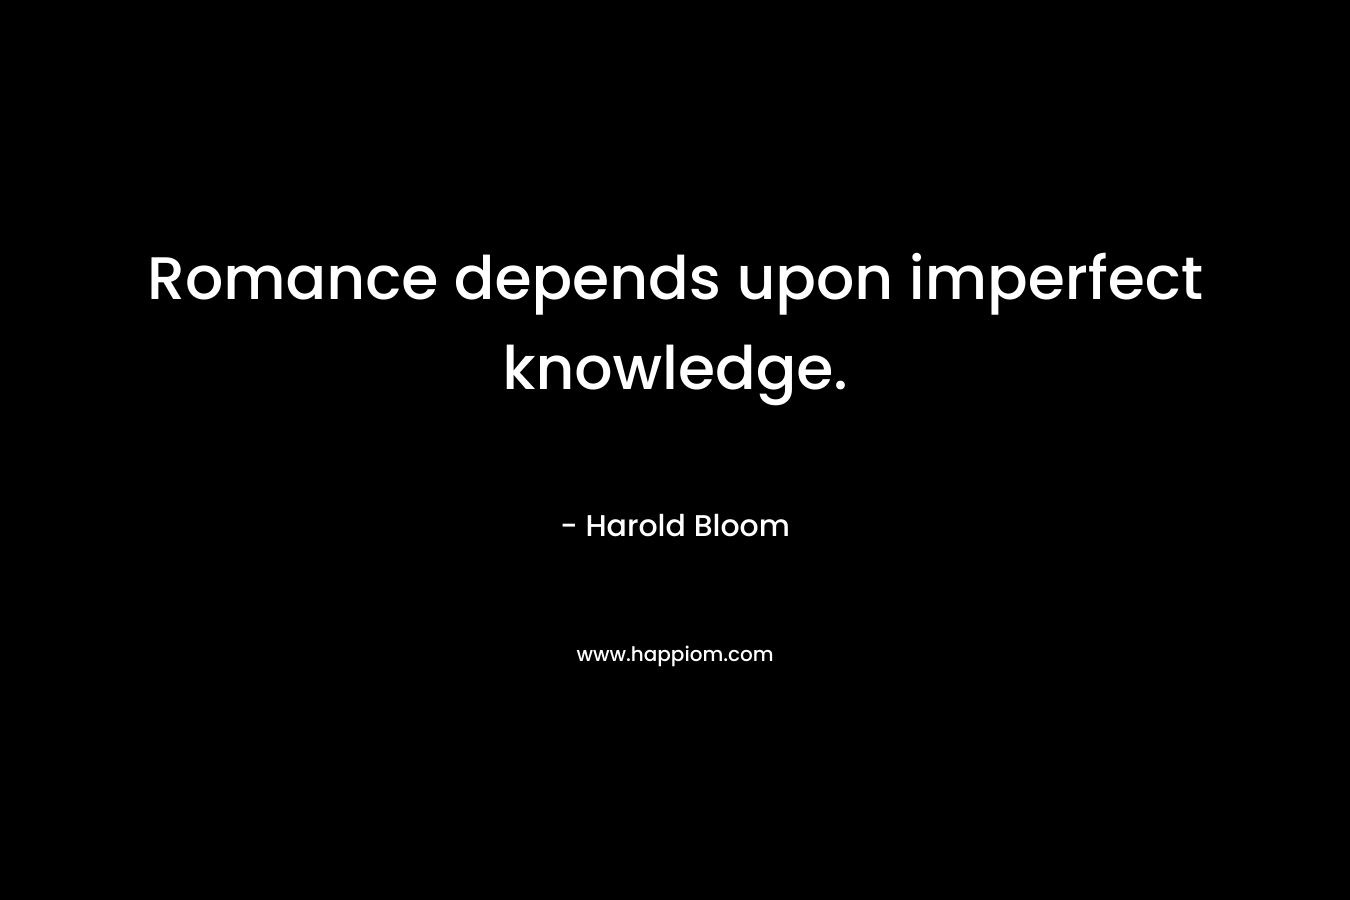 Romance depends upon imperfect knowledge.